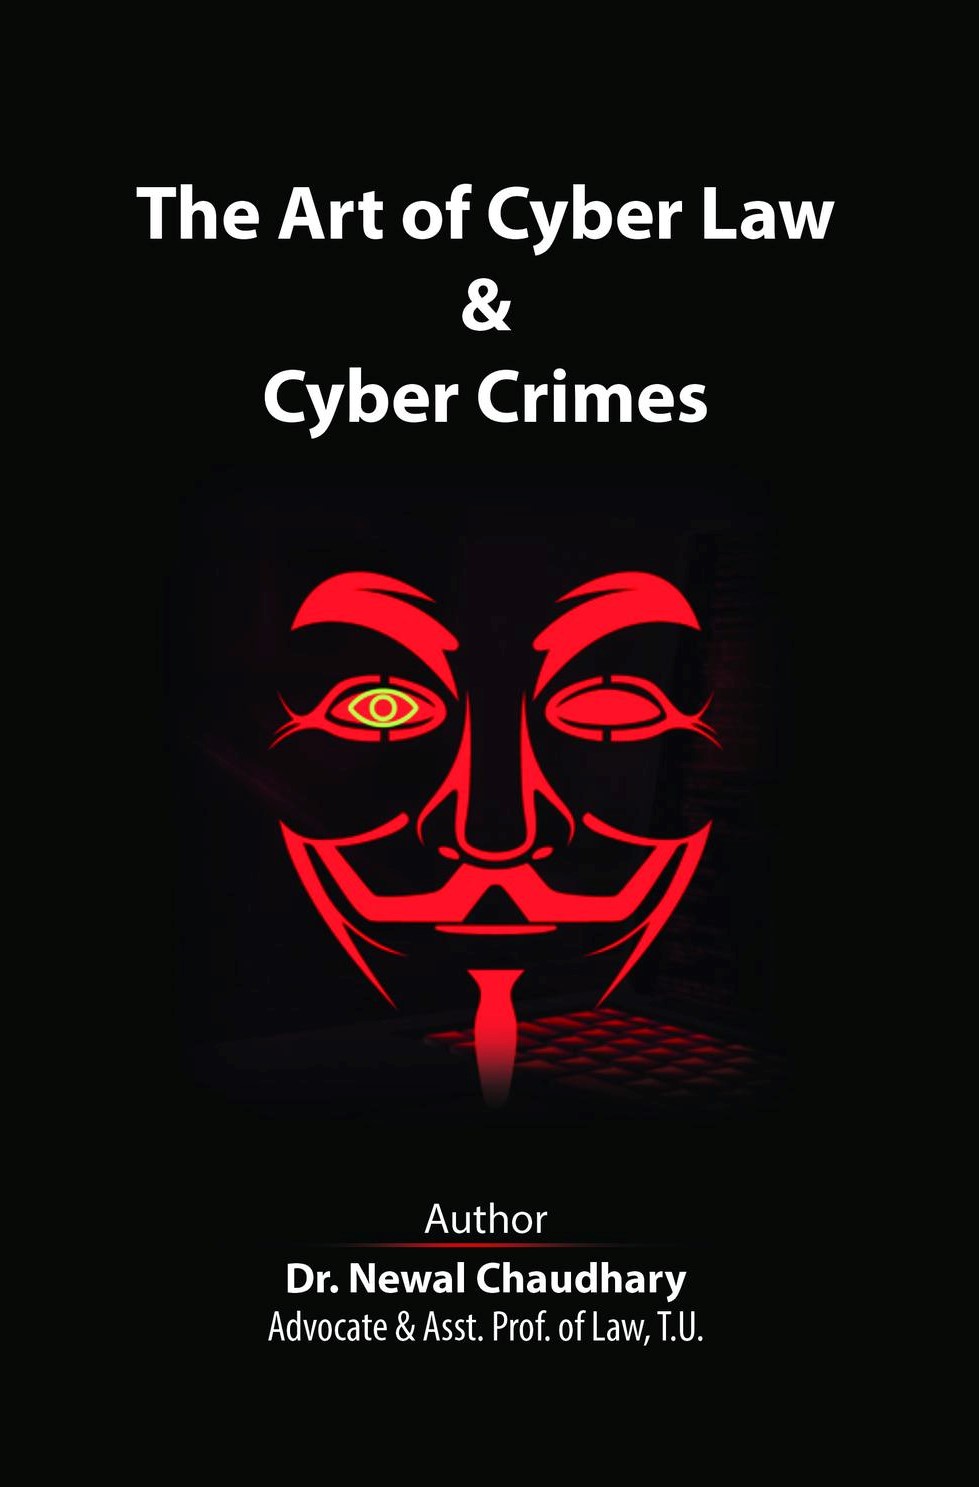 The Art of Cyber Law & Cyber Crimes